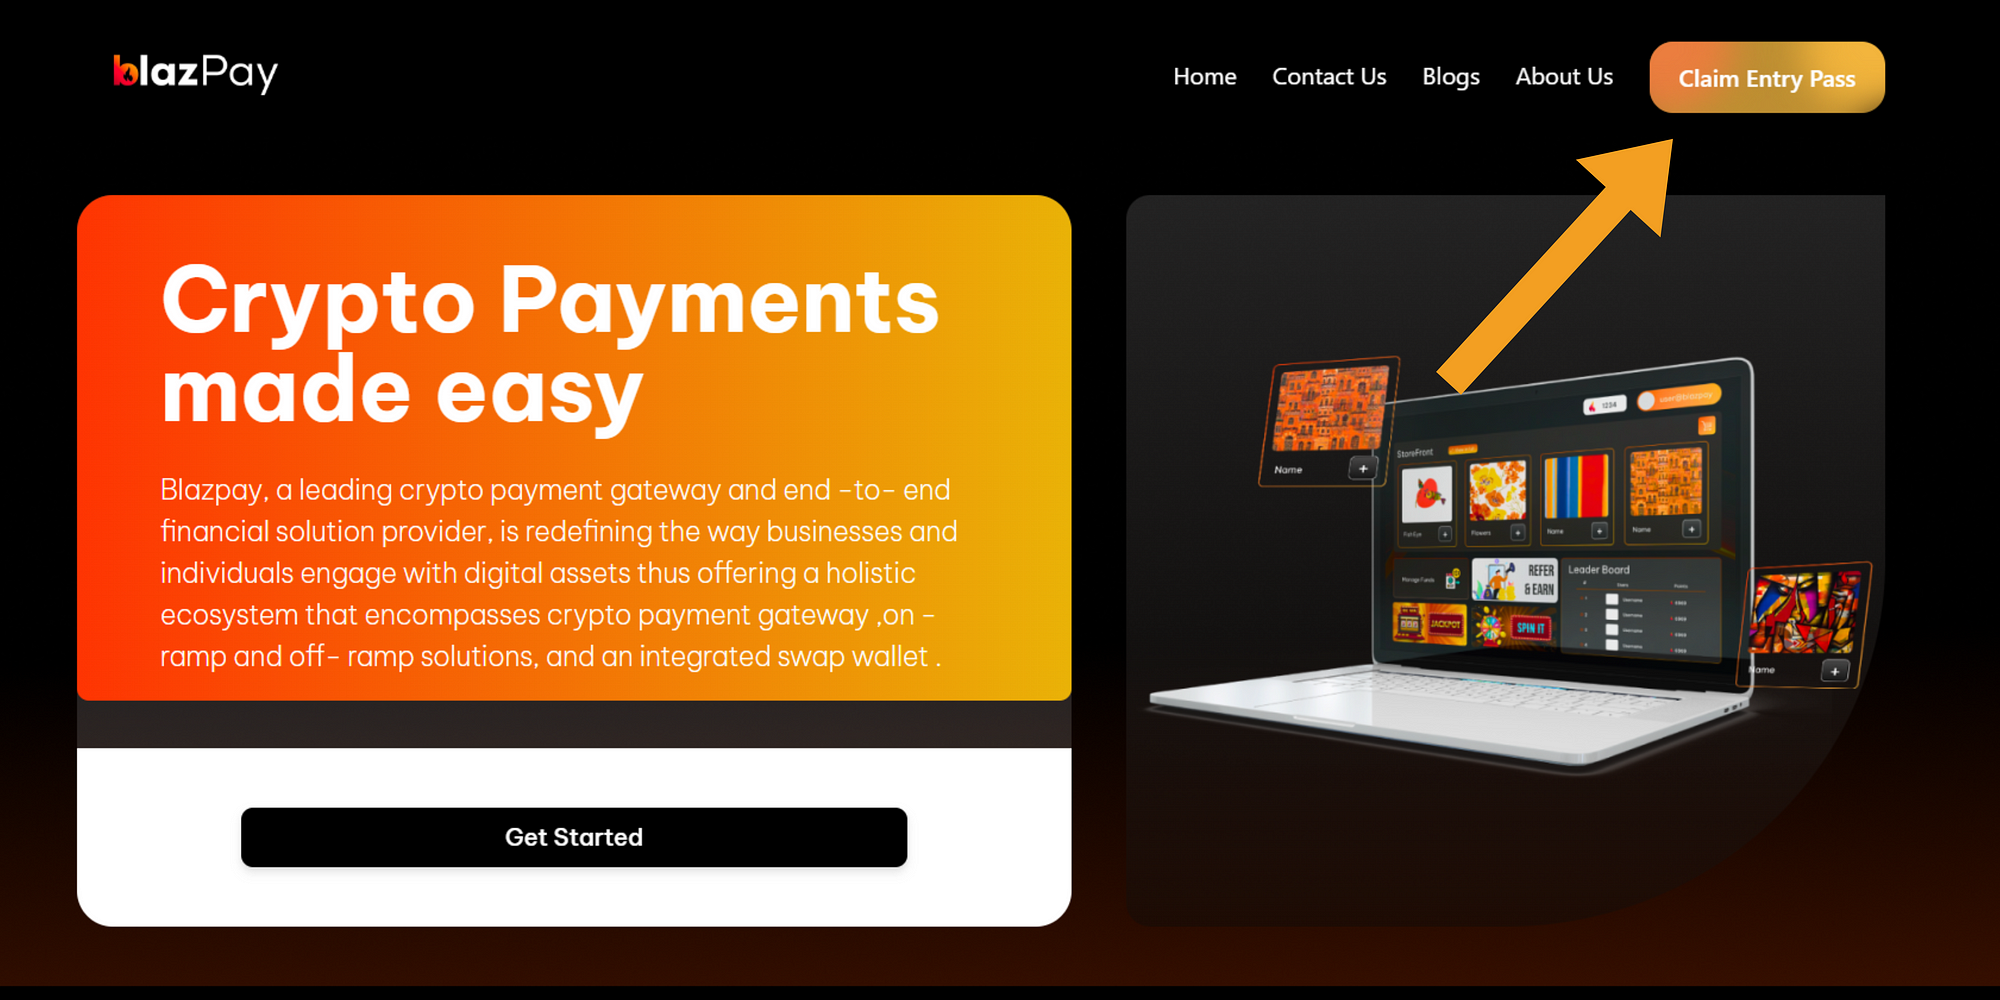 Head over to Blazpay and click on claim Entrypass.